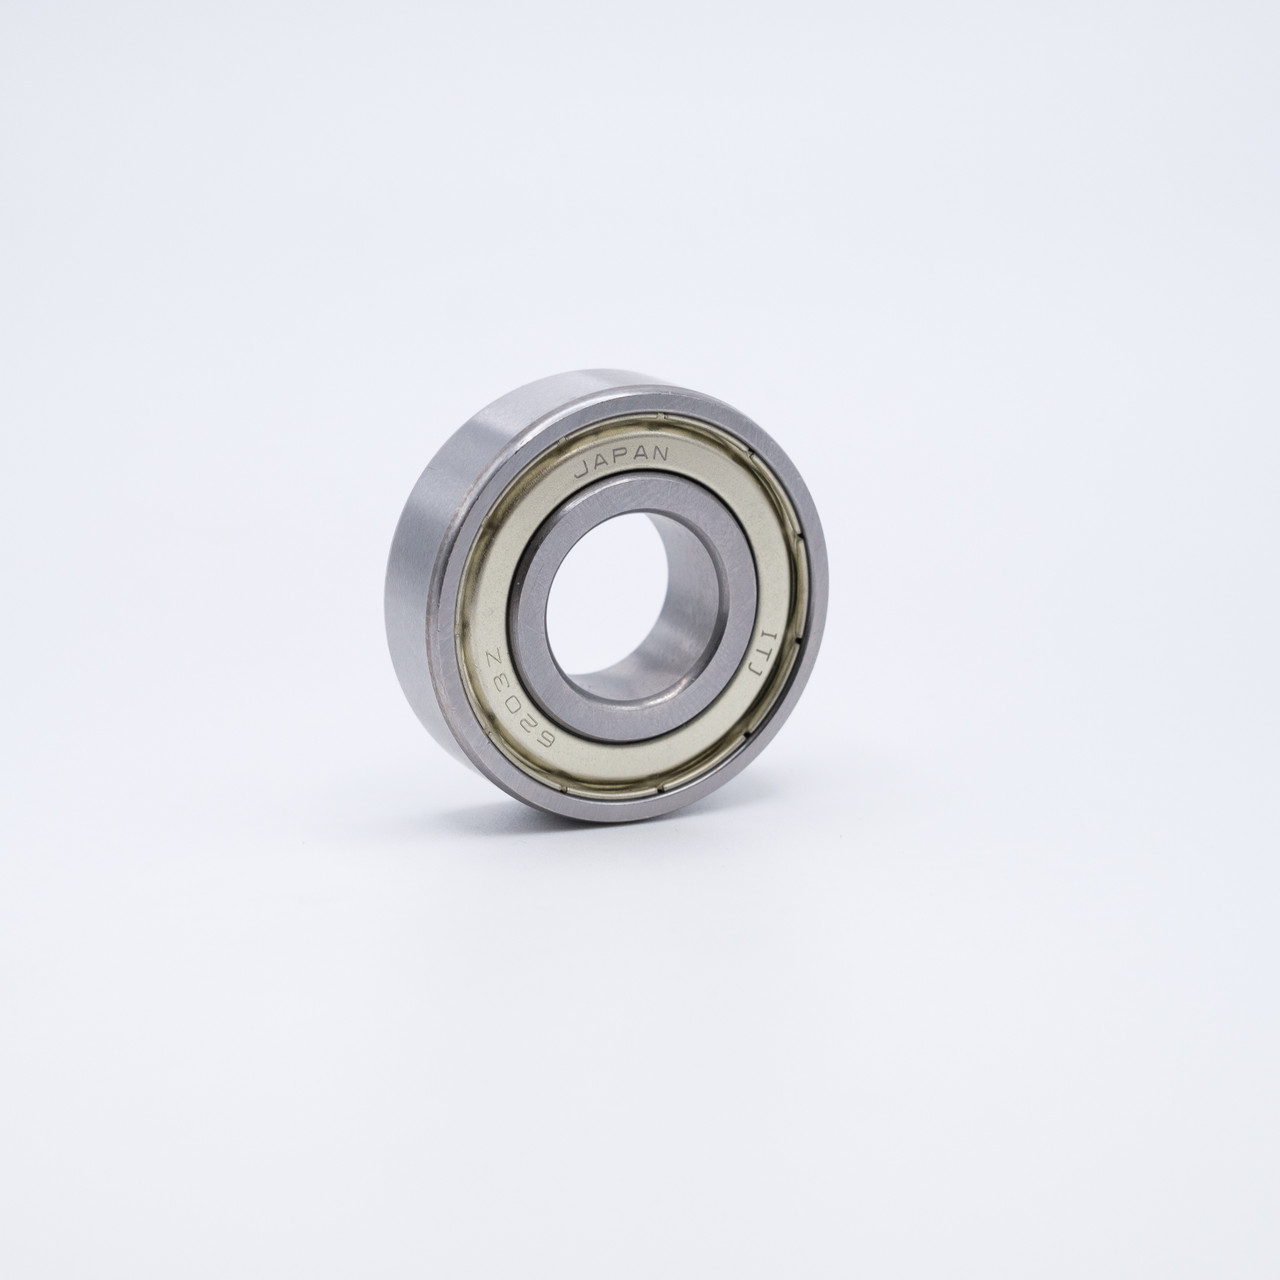 S6204-ZZ Stainless Ball Bearing 20x47x14 Angled View